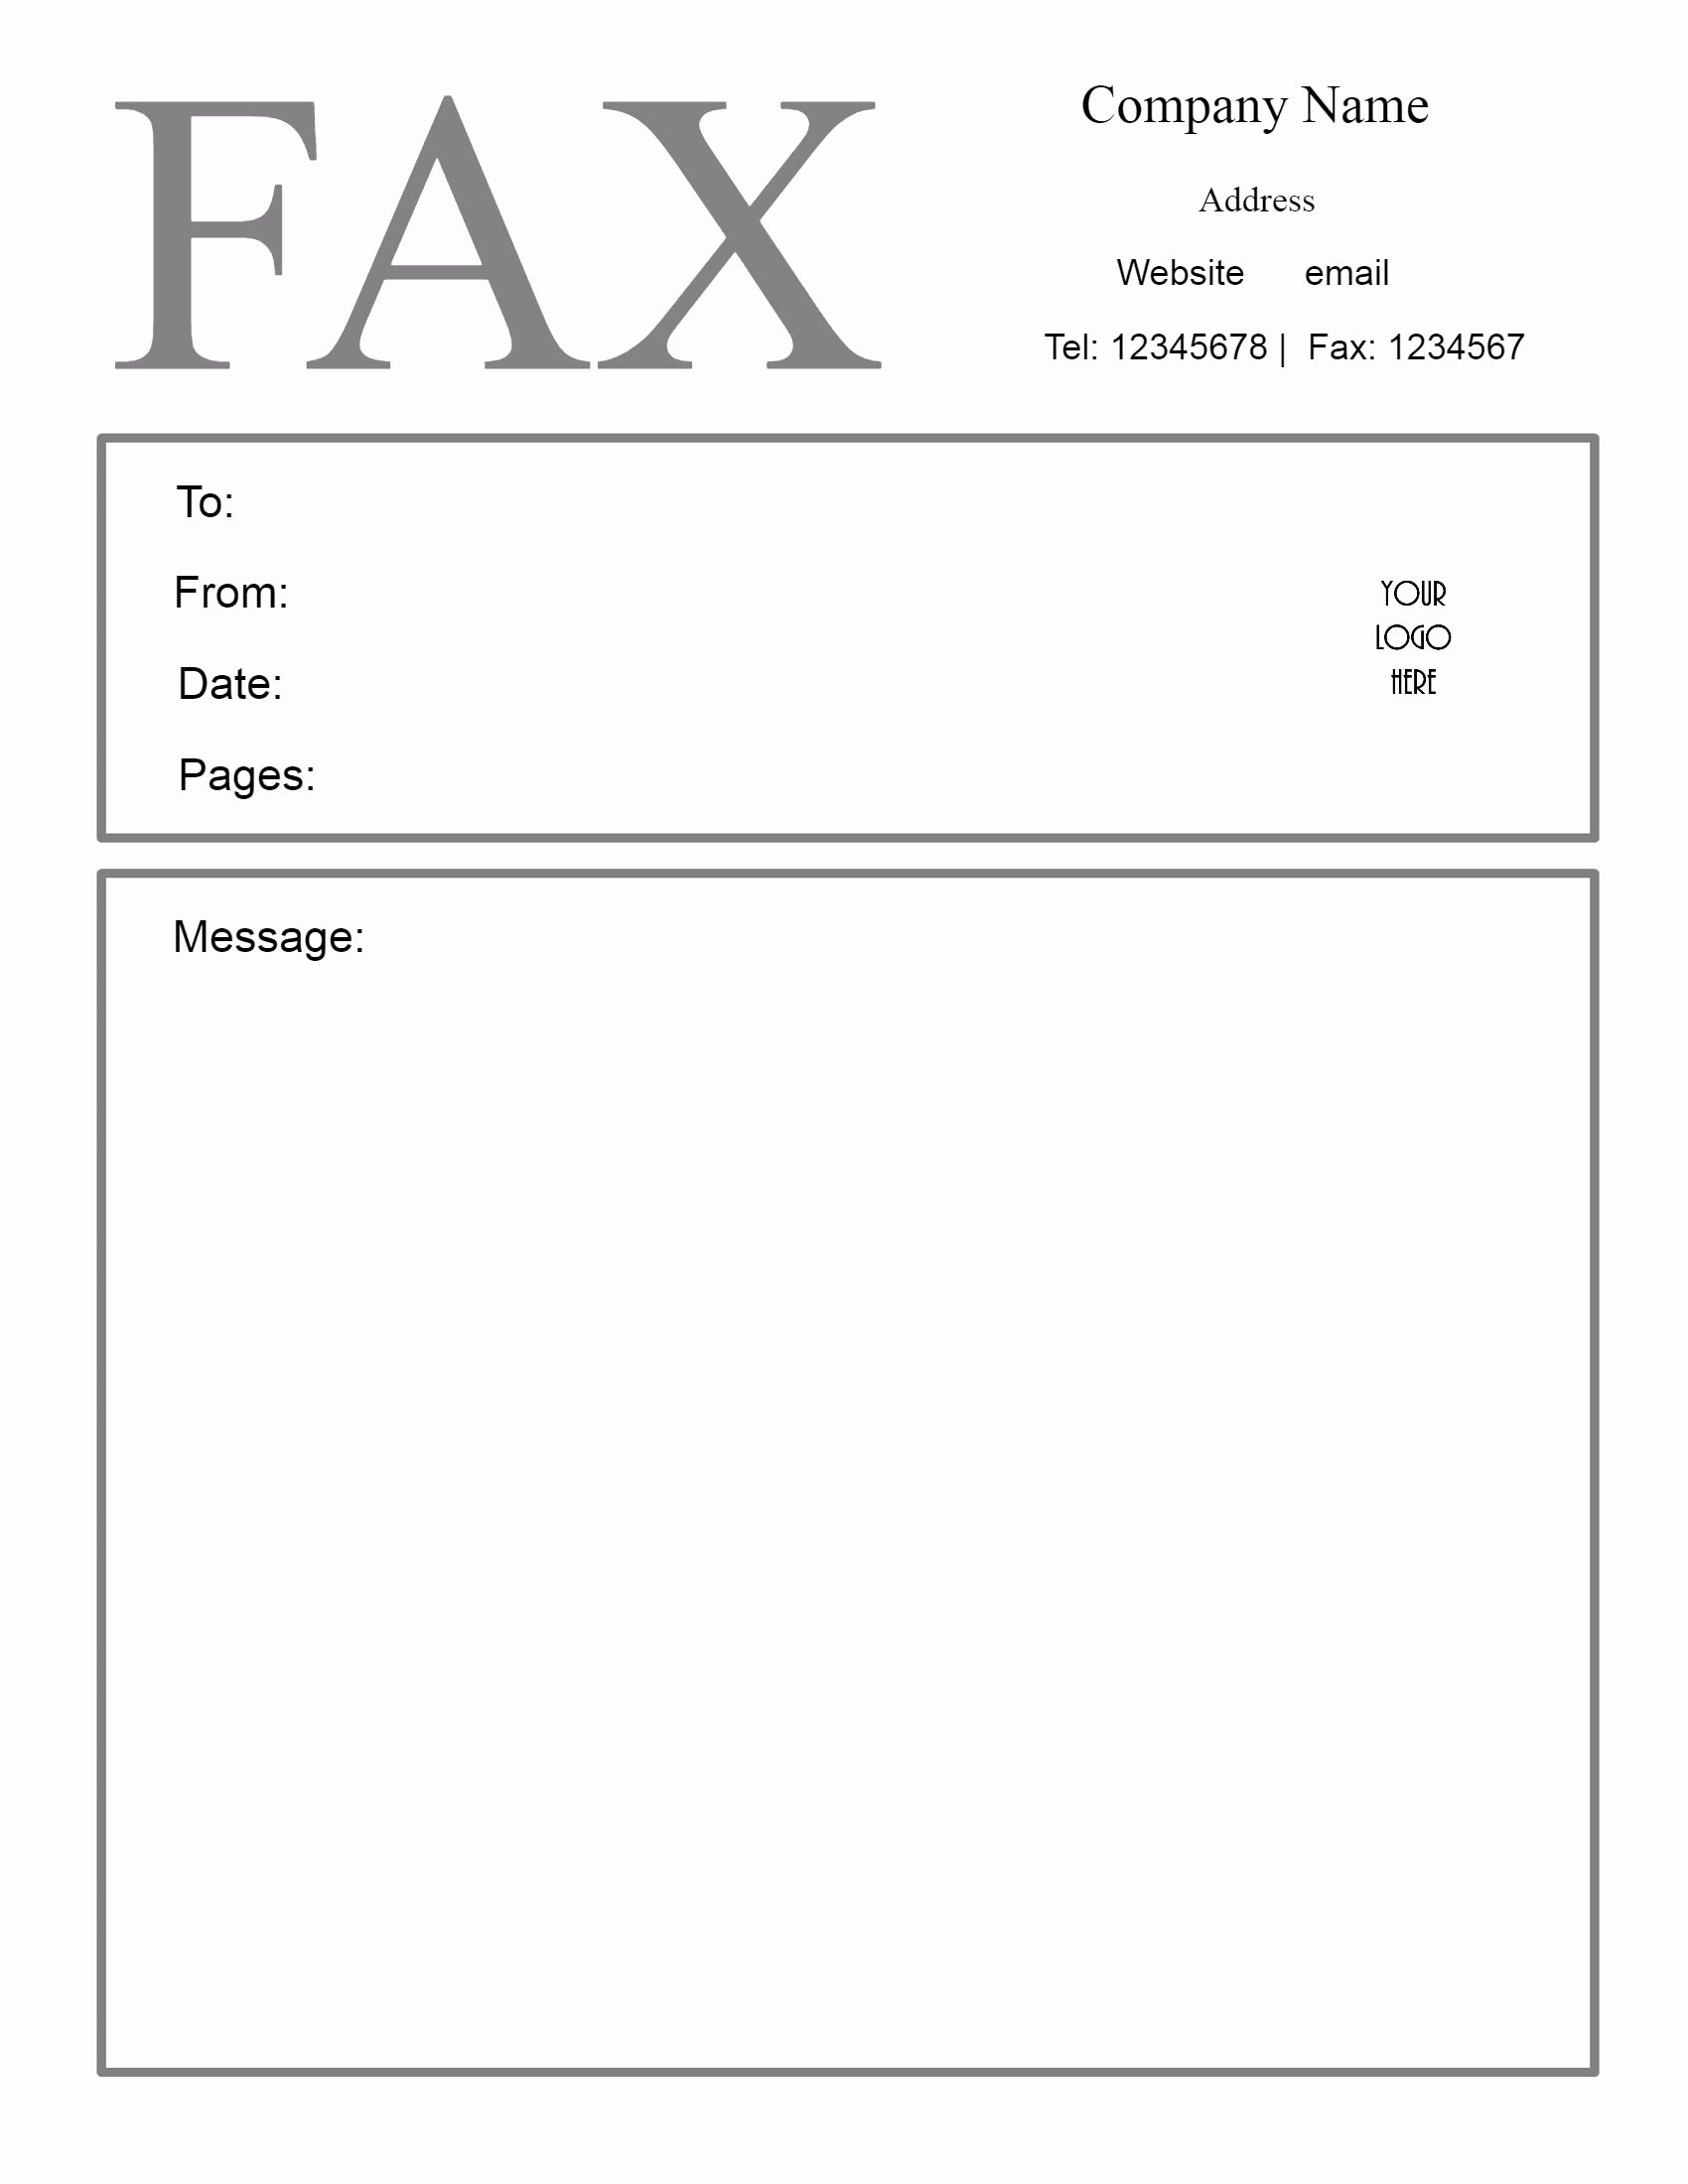 Fax Cover Sheet Word Template Beautiful Free Fax Cover Letter Template